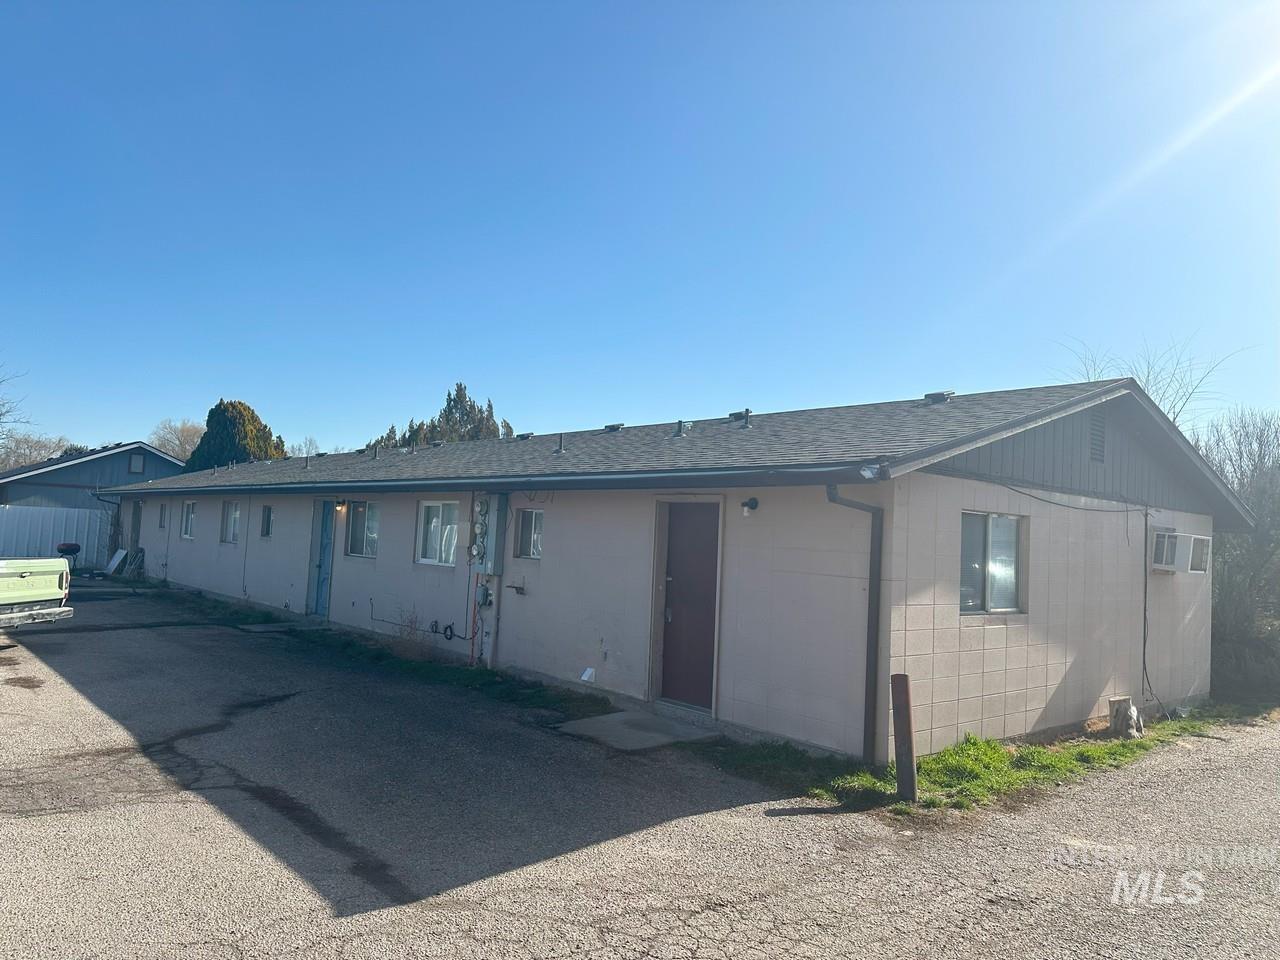 1413/1419 Missoula Way, Caldwell, Idaho 83605-6396, 2 Bedrooms, 1.5 Bathrooms, Residential Income For Sale, Price $1,105,000,MLS 98902606